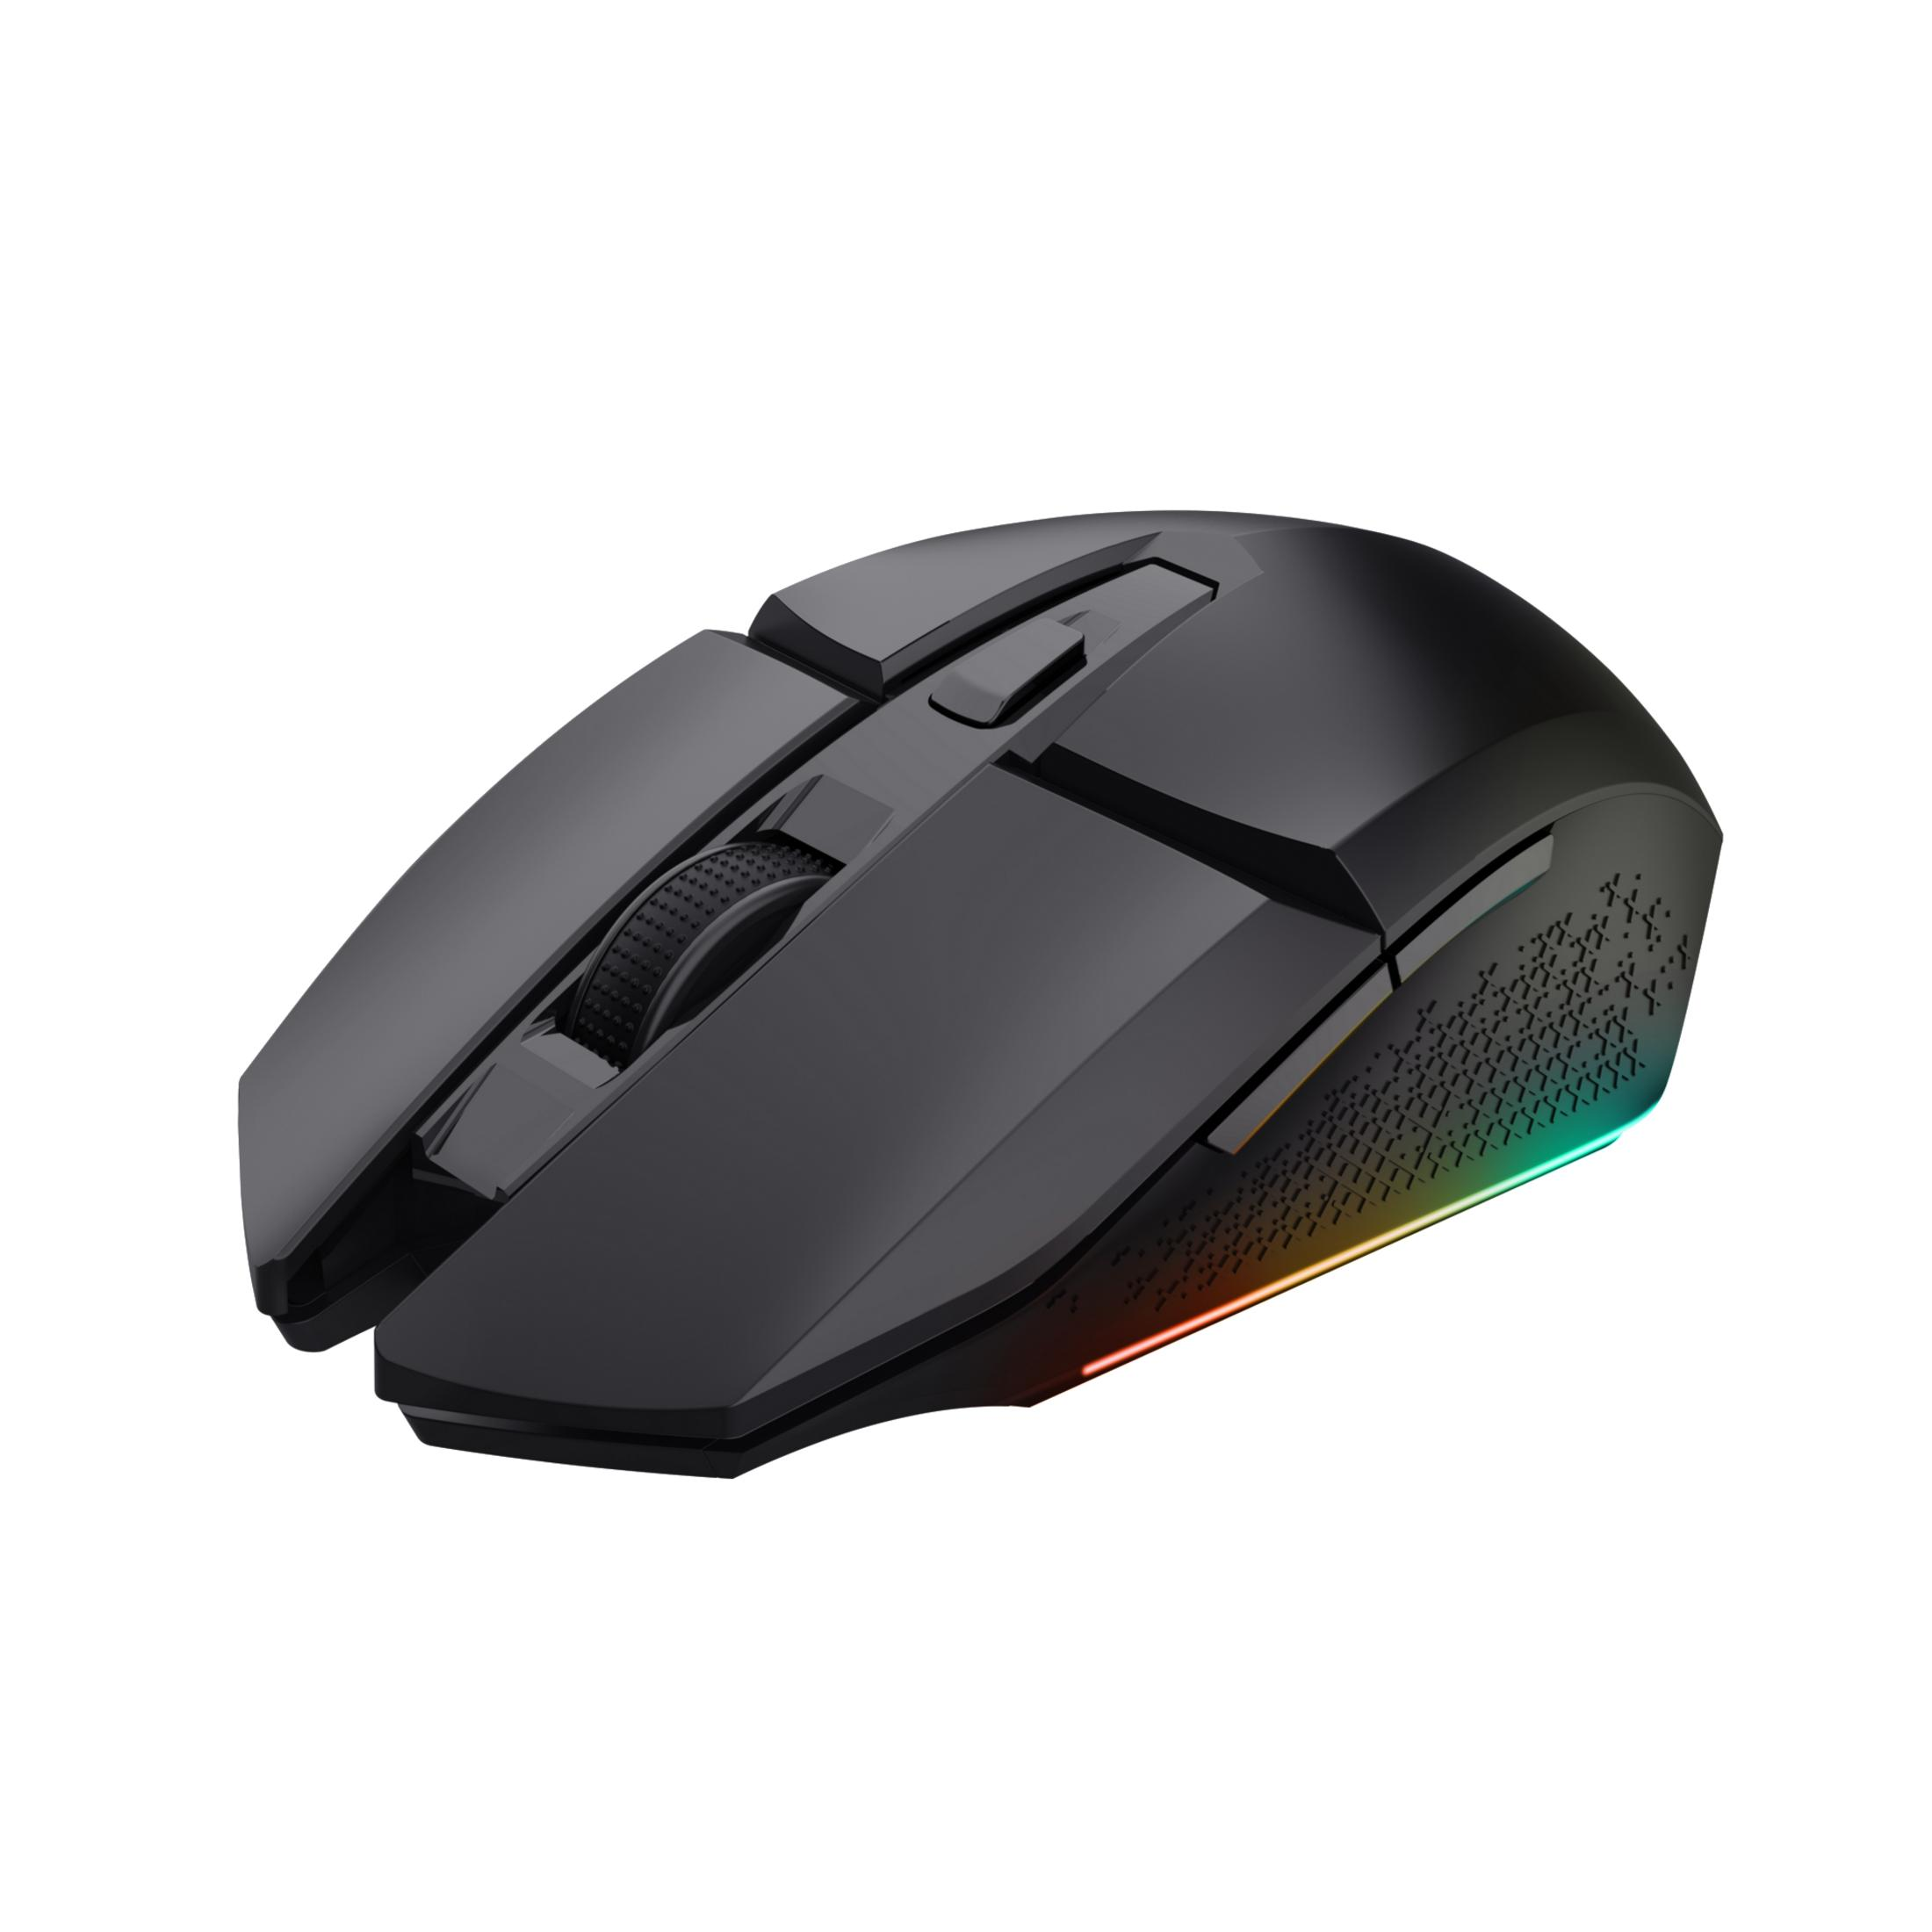 Booster BLACK WIRELESS Black MOUSE TRUST 25037 Gaming Maus, FELOX GXT110